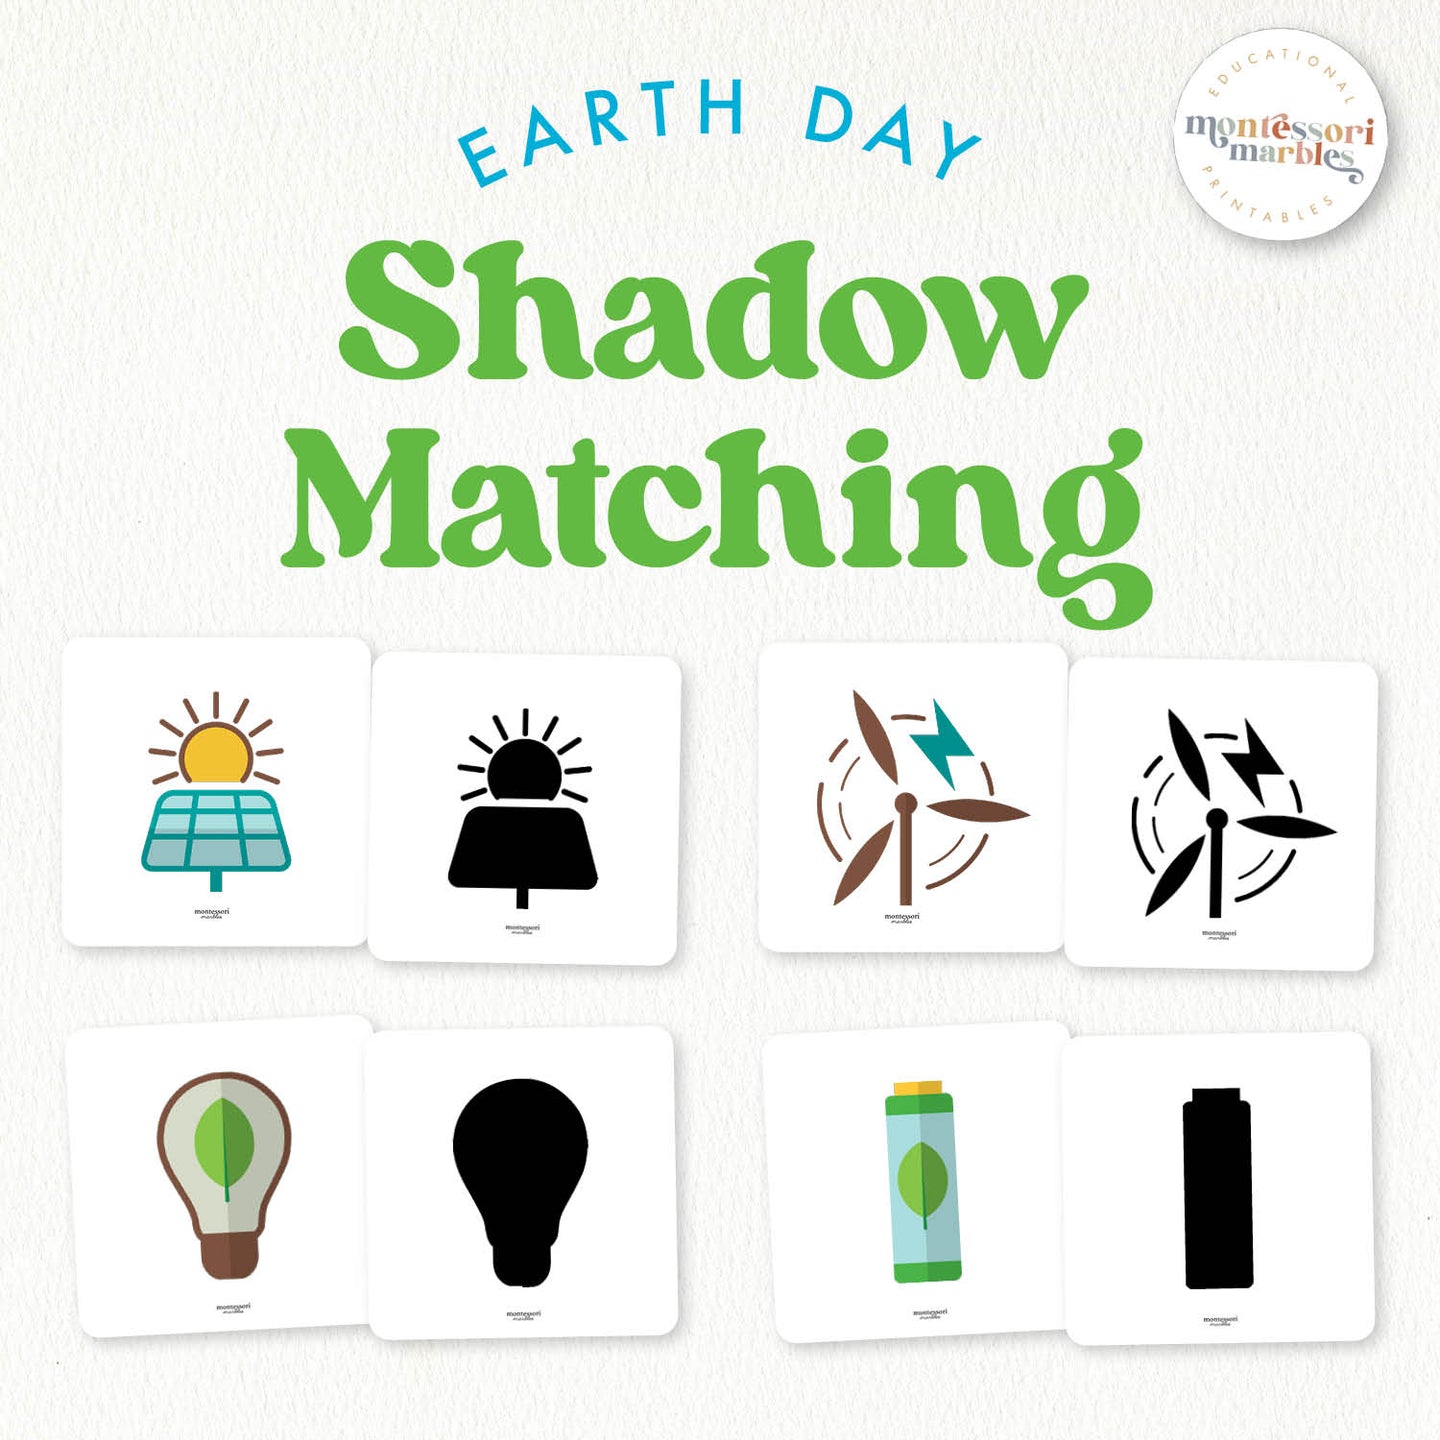 Earth Day Shadow Matching